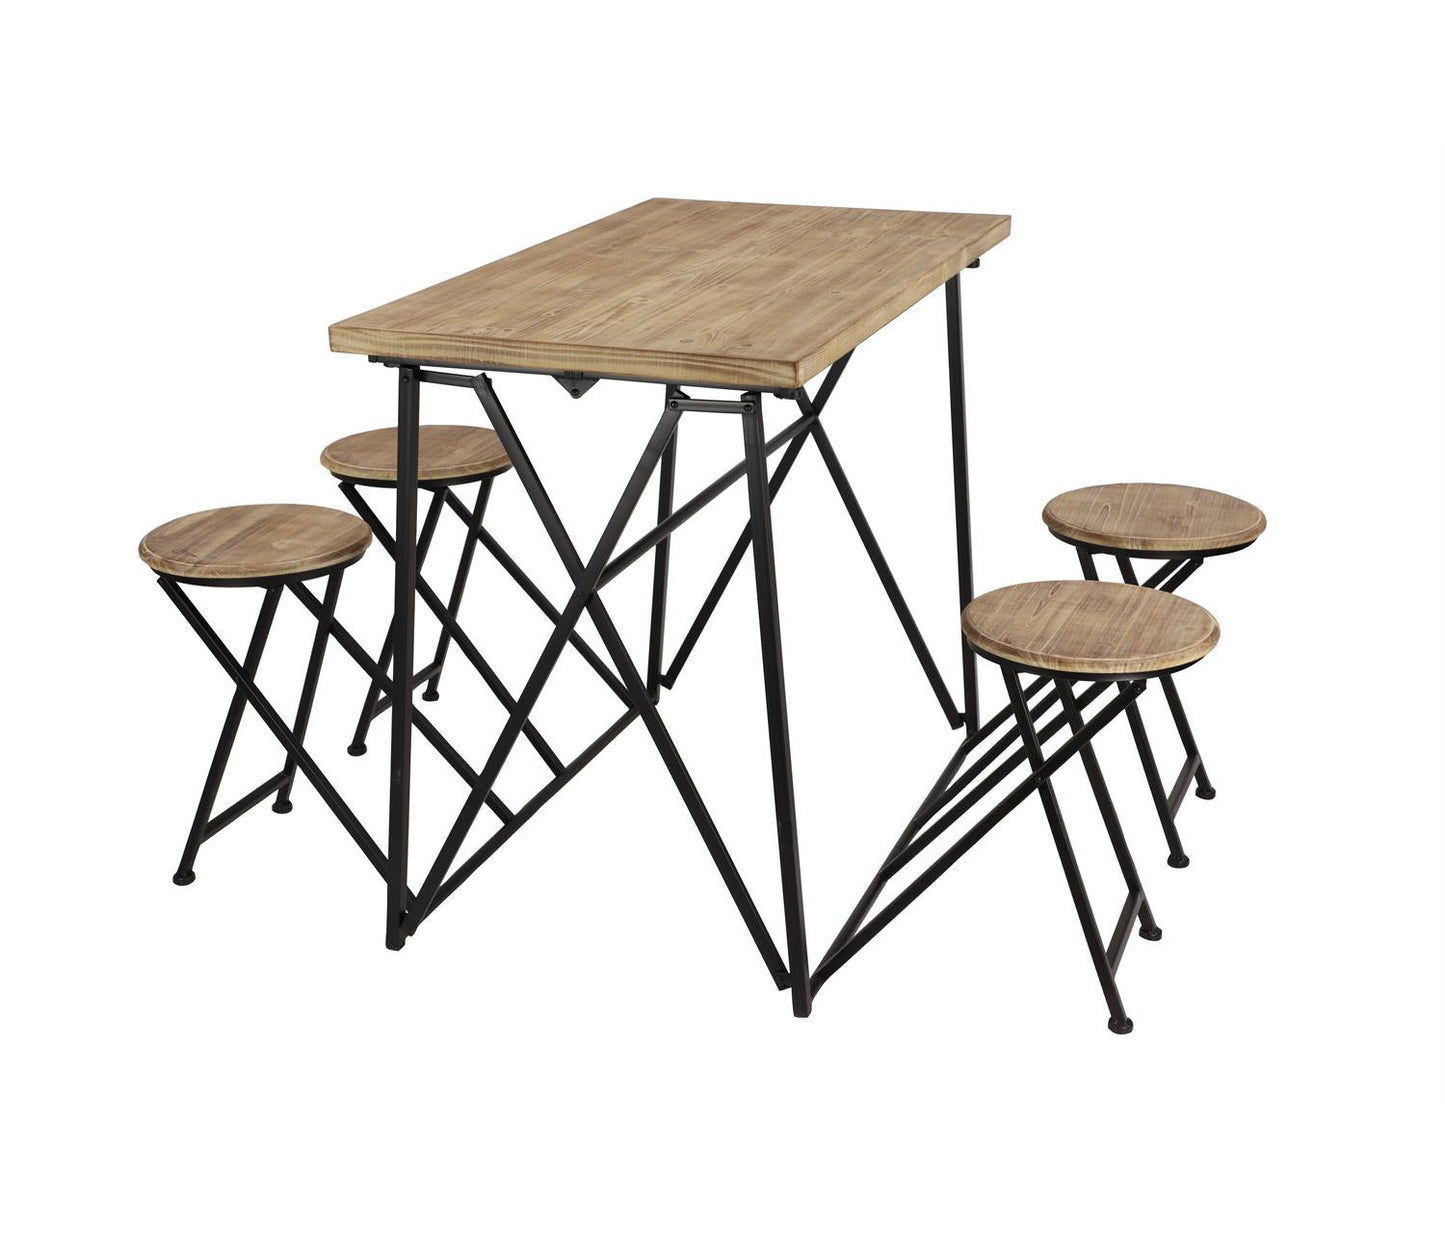 Light Brown Wood Folding Dining Table With Black Metal